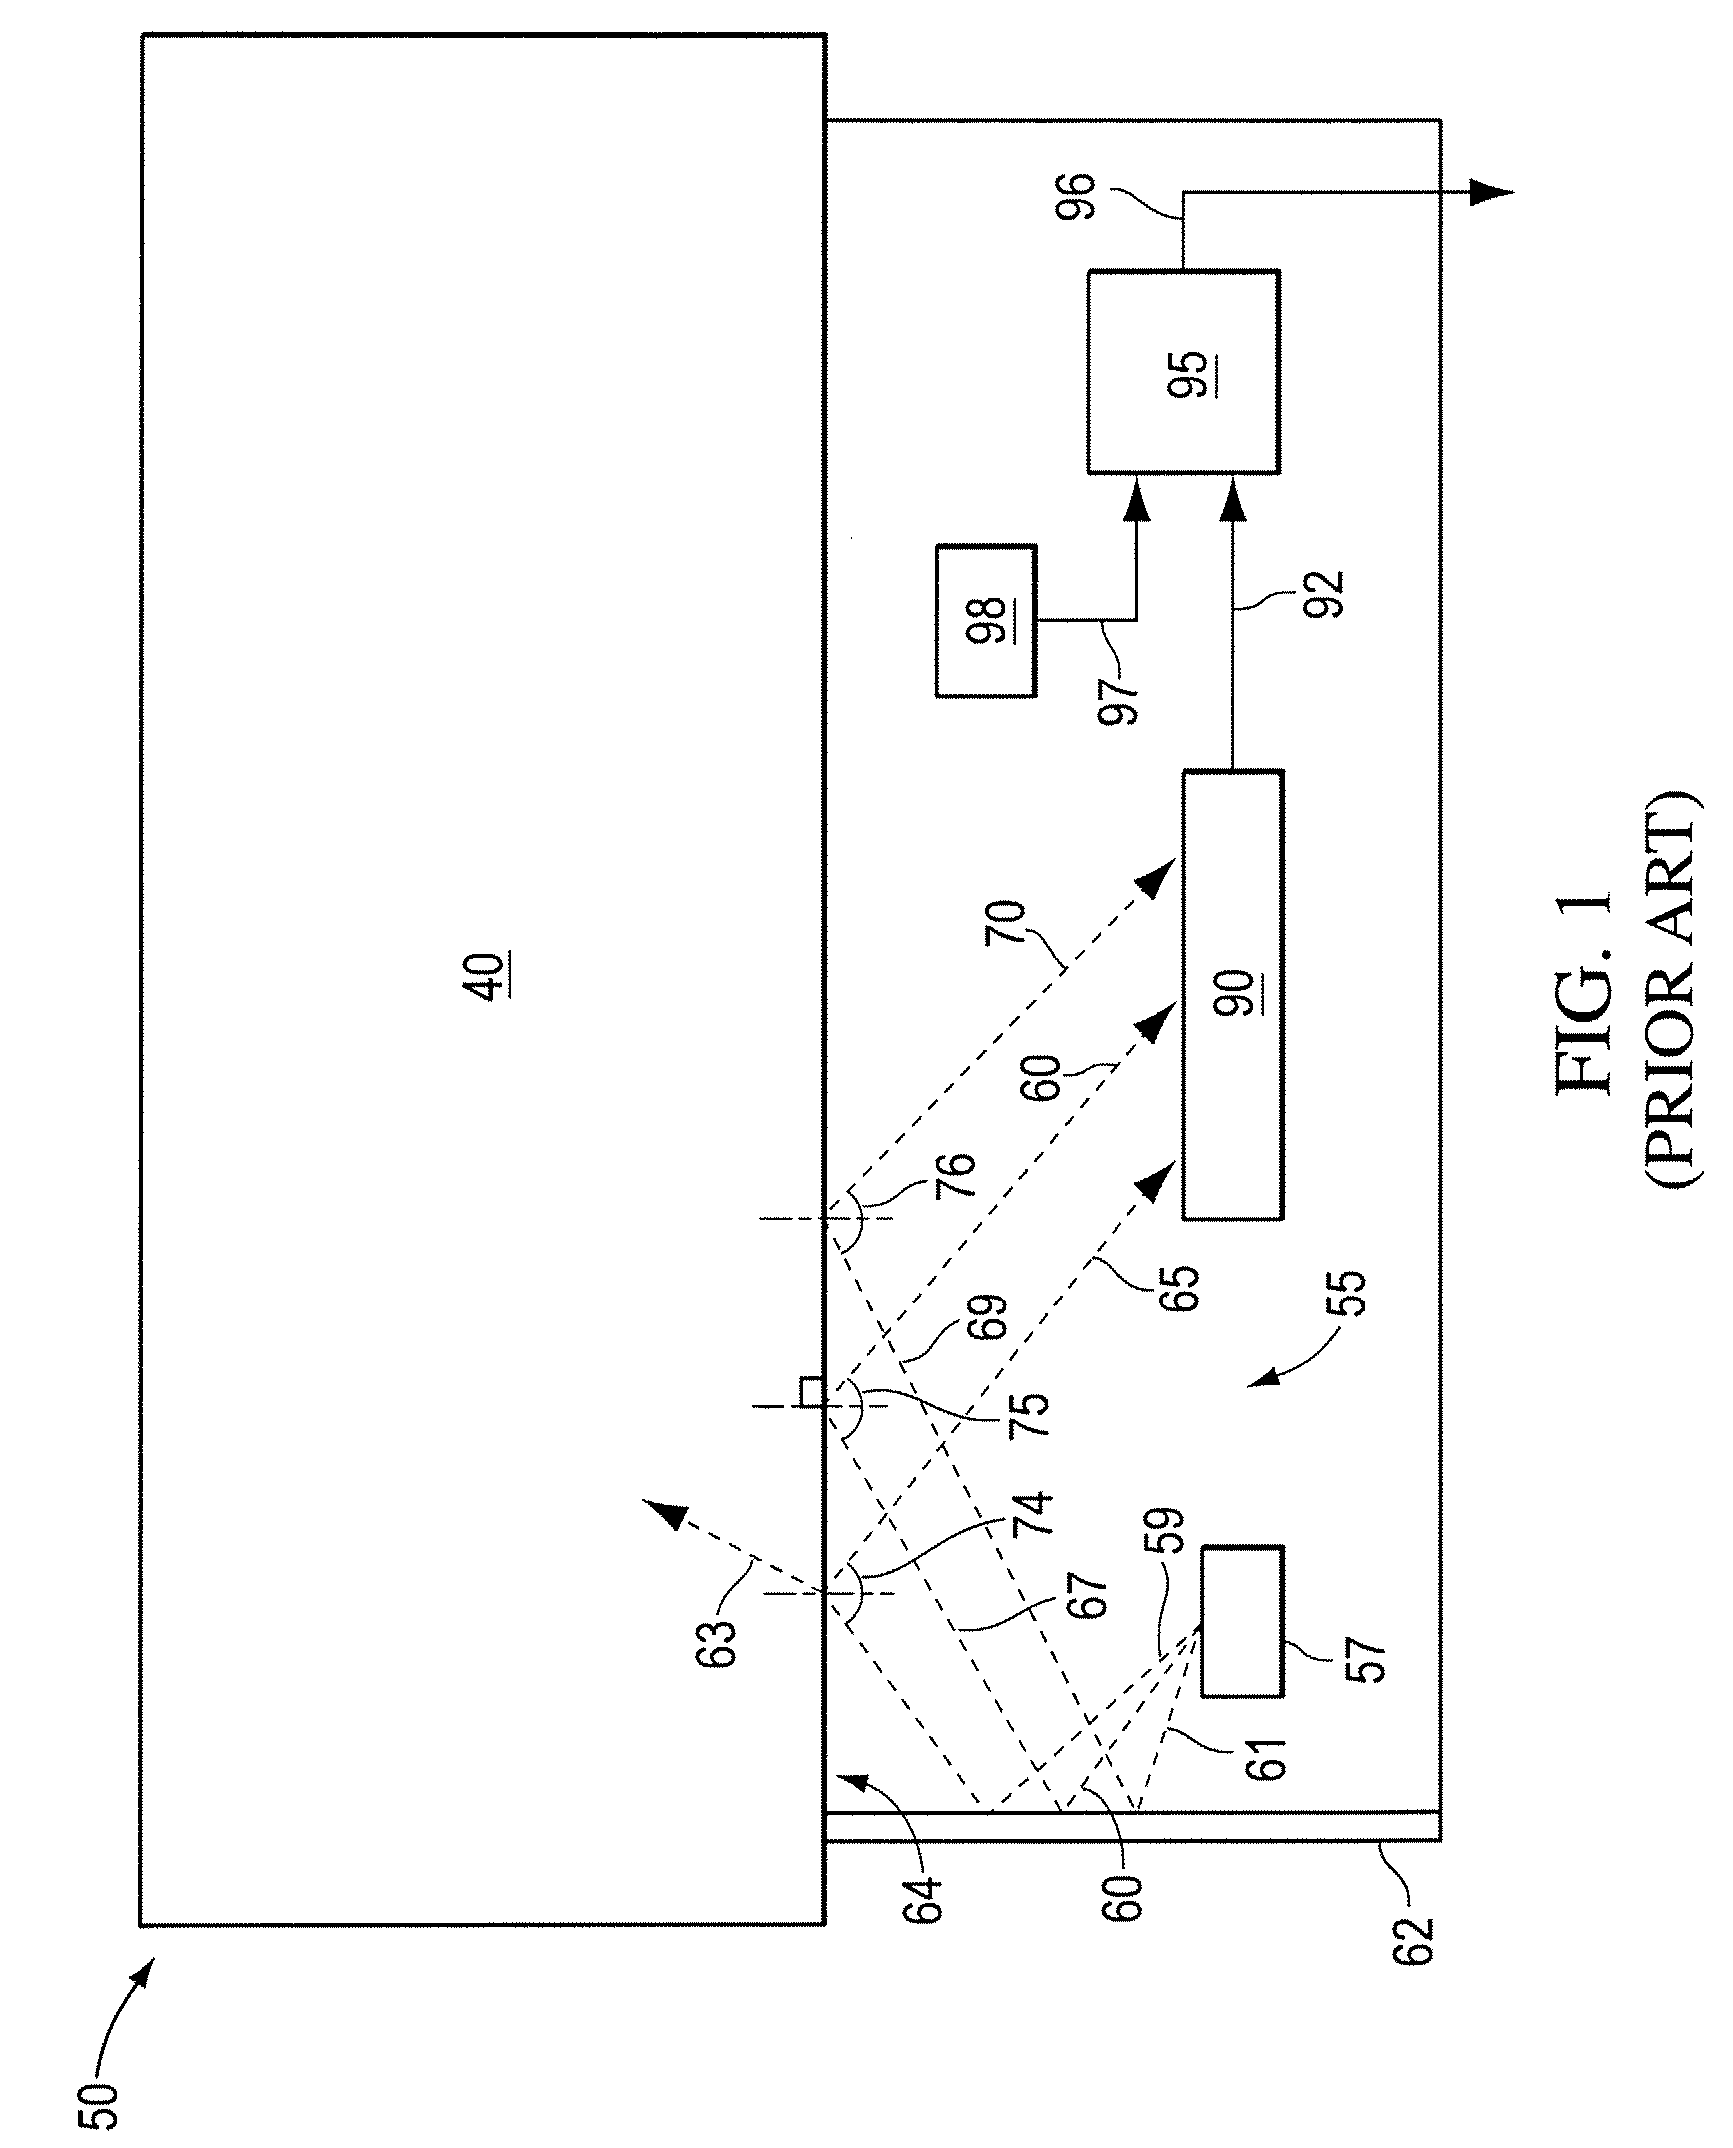 Method for a liquid chemical concentration analysis system